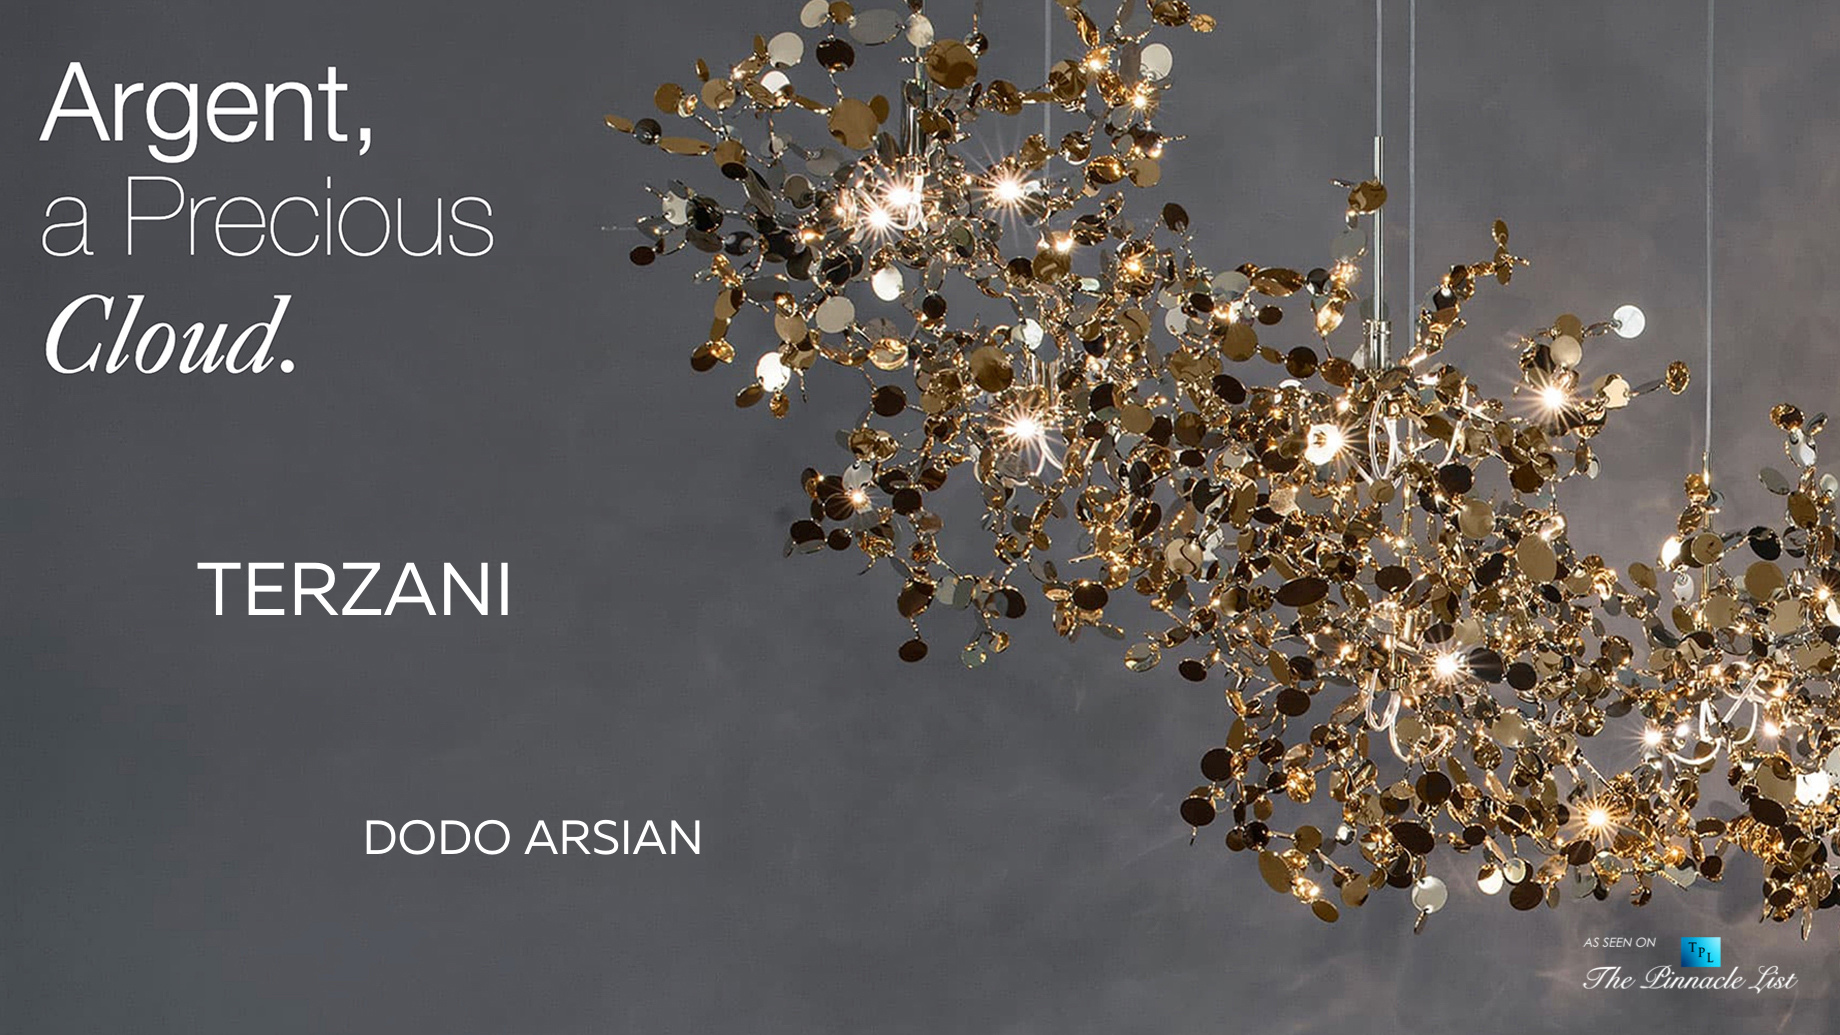 A Precious Cloud Sculpture of Light - Argent Fixtures by Terzani Lighting Italy